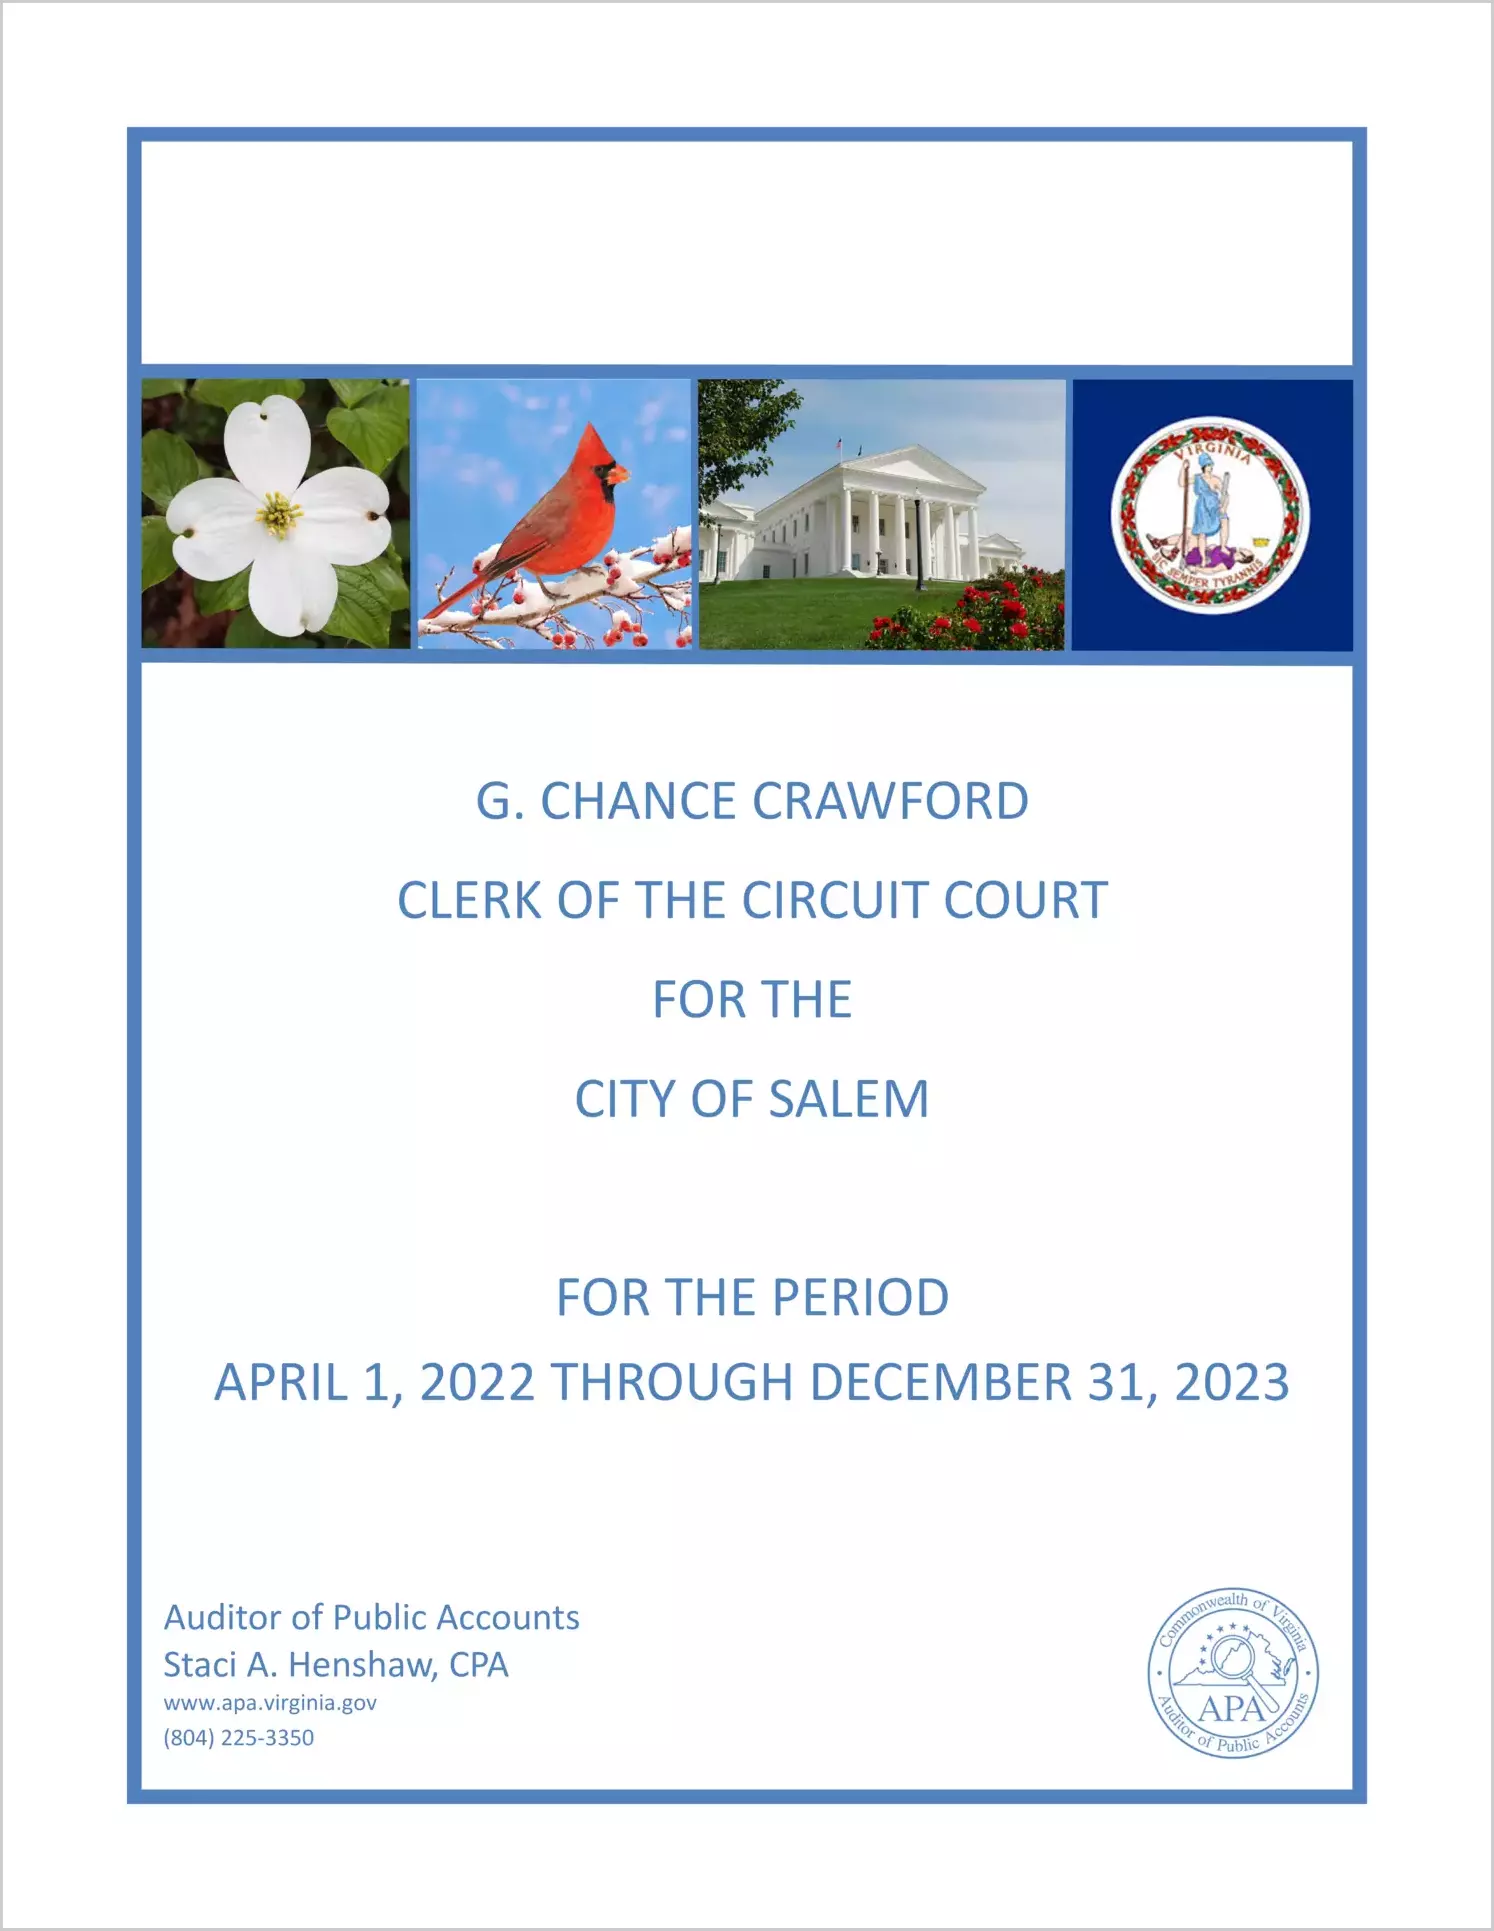 Clerk of the Circuit Court for the City of Salem for the period April 1, 2022 through December 31, 2023